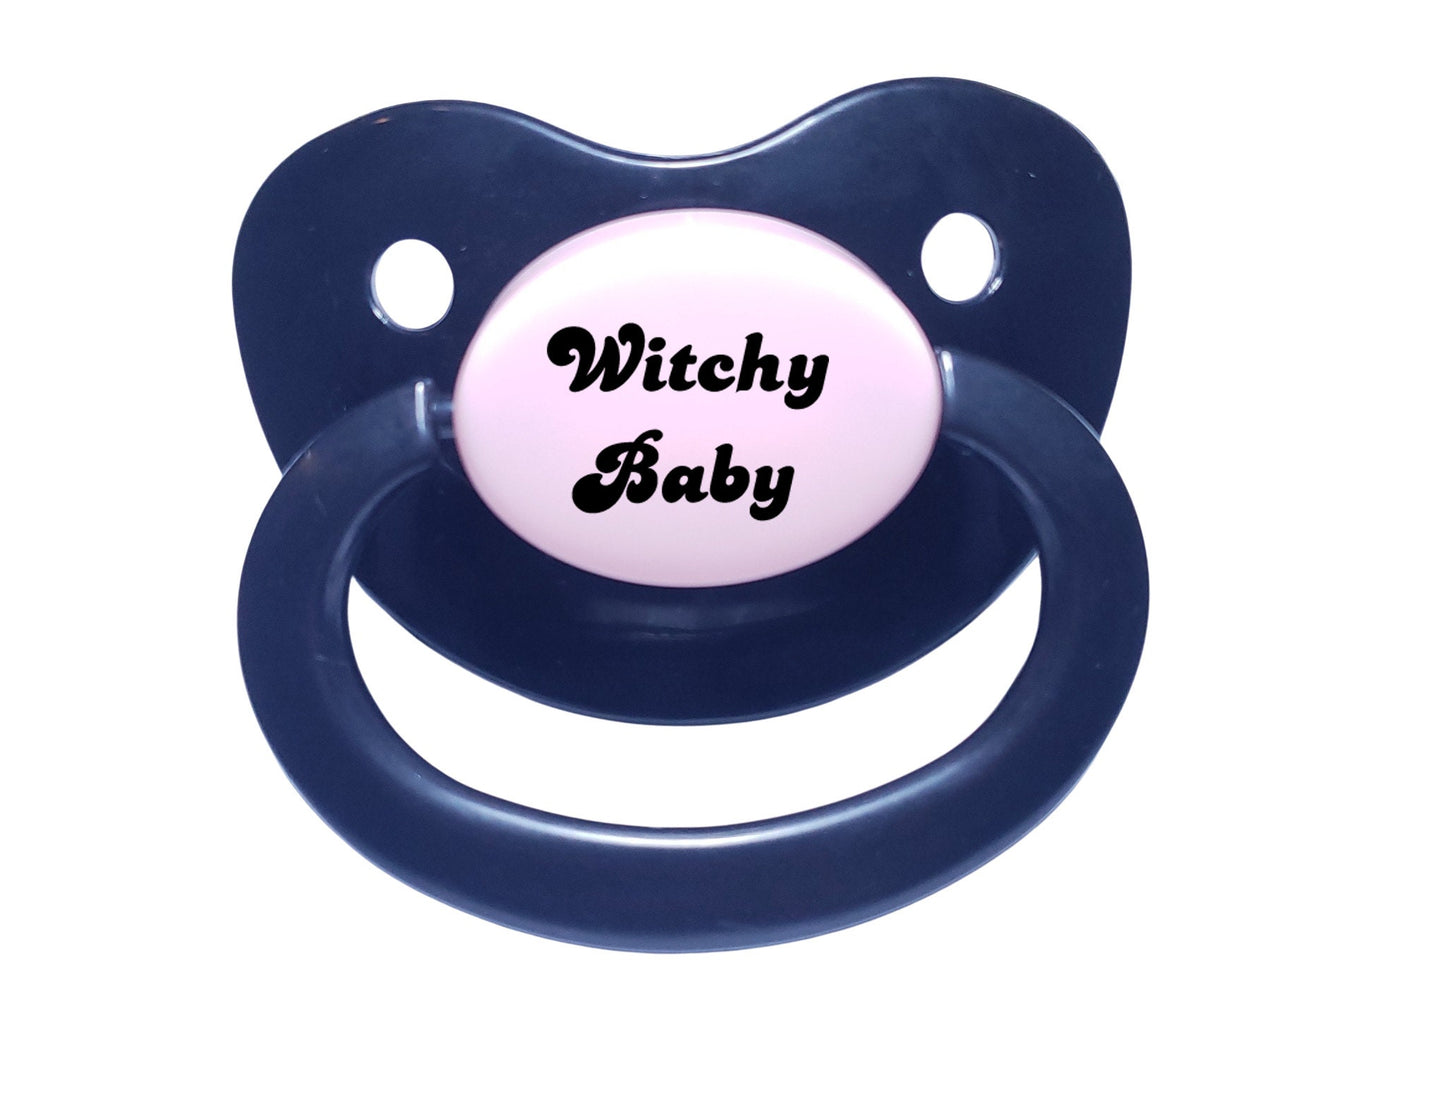 Witchy Baby Adult Pacifier